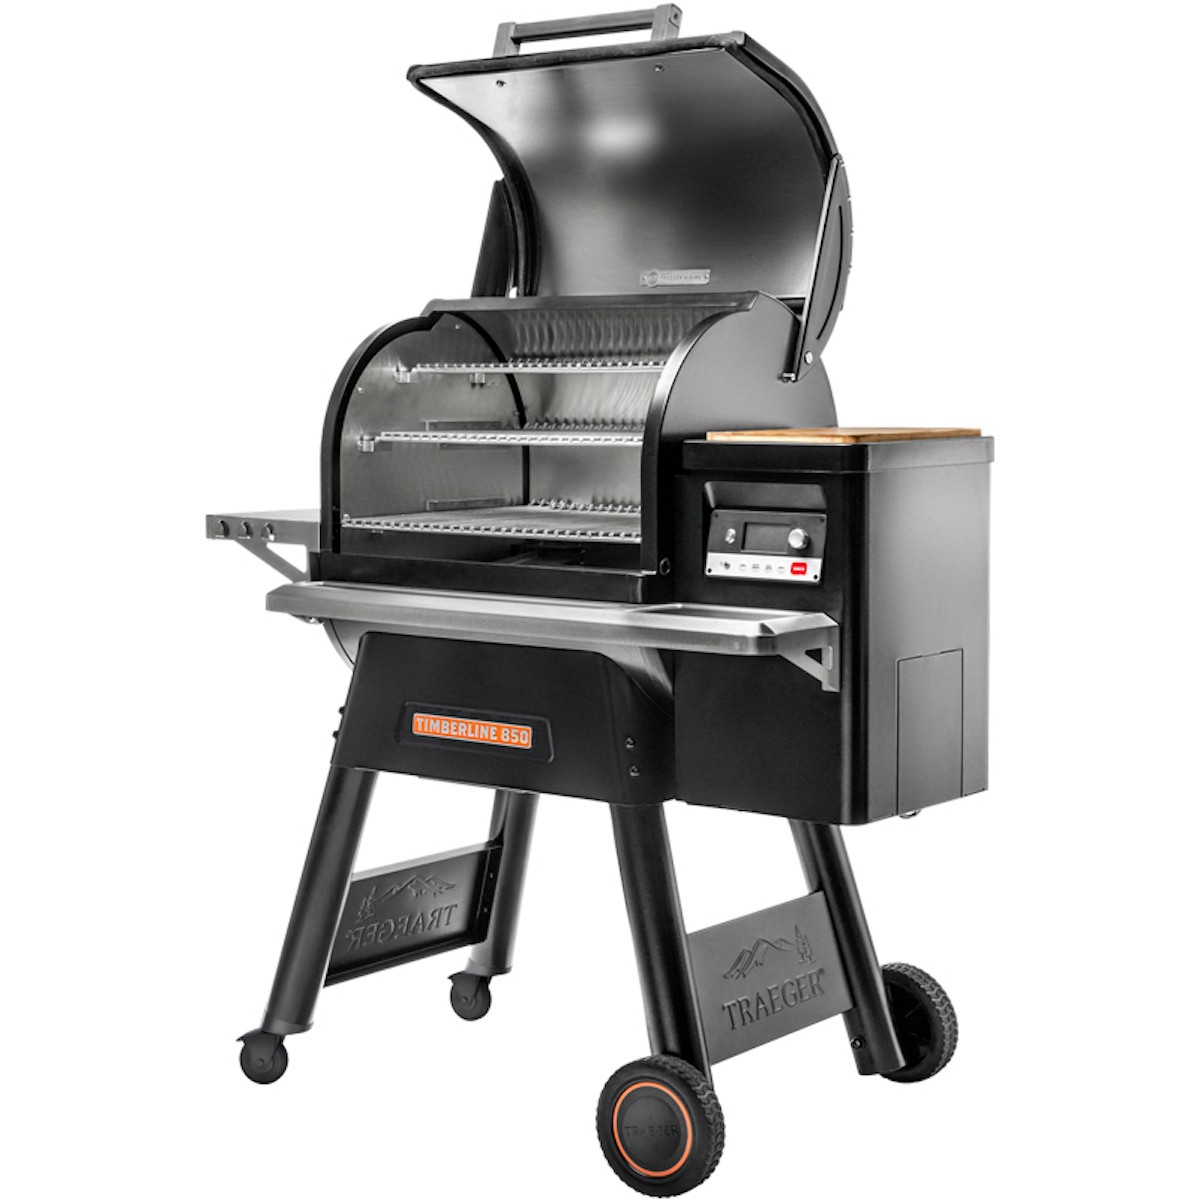 Traeger Timberline 850 inkl. MEATER Plus